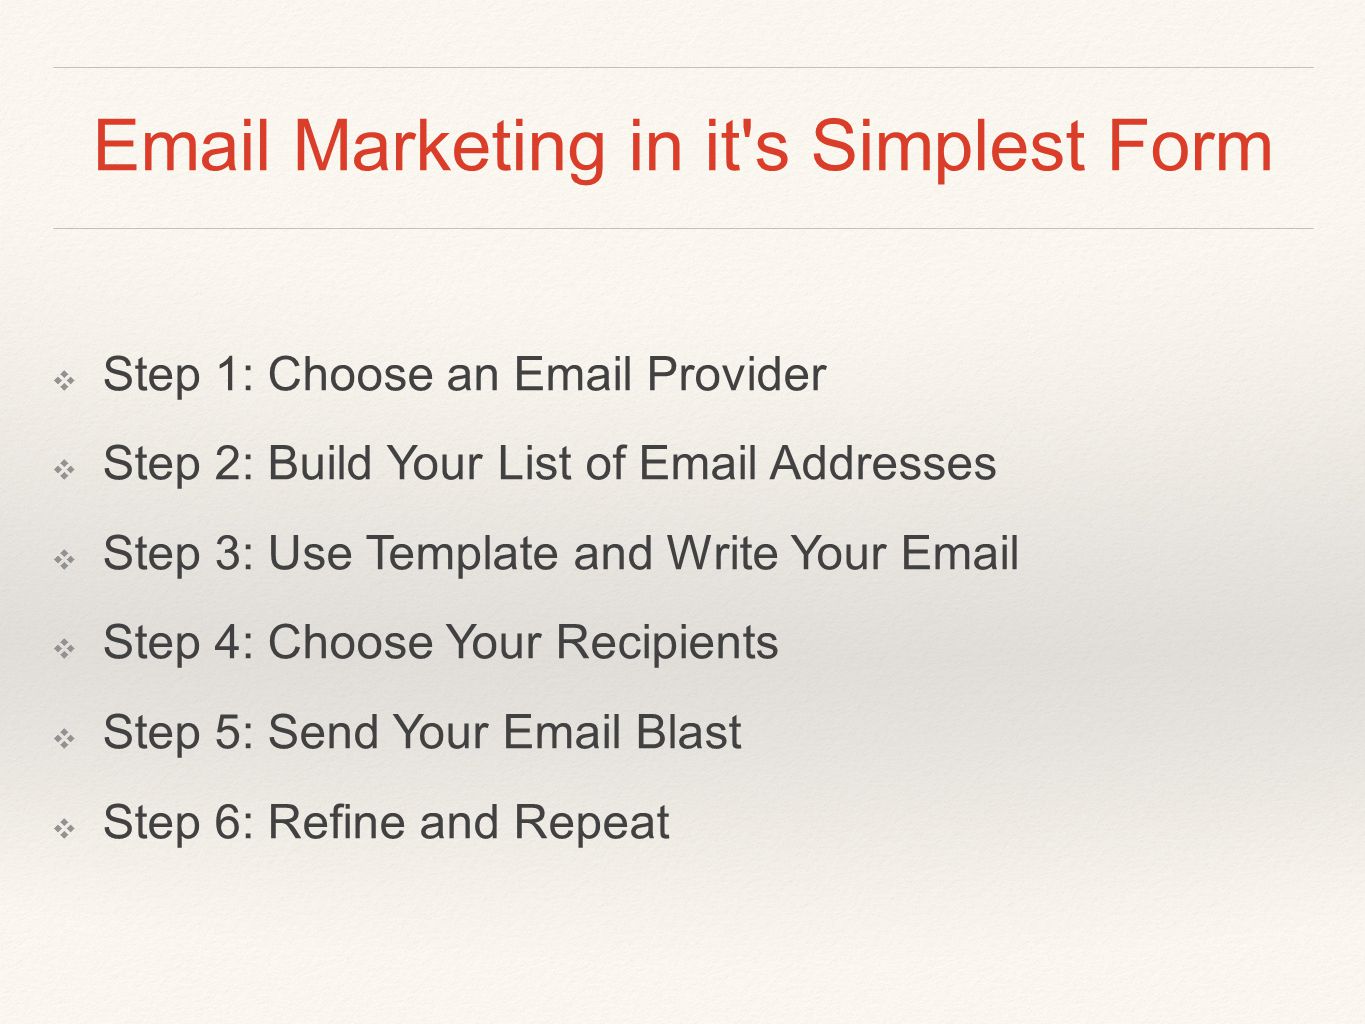 Marketing in it s Simplest Form ❖ Step 1: Choose an  Provider ❖ Step 2: Build Your List of  Addresses ❖ Step 3: Use Template and Write Your  ❖ Step 4: Choose Your Recipients ❖ Step 5: Send Your  Blast ❖ Step 6: Refine and Repeat